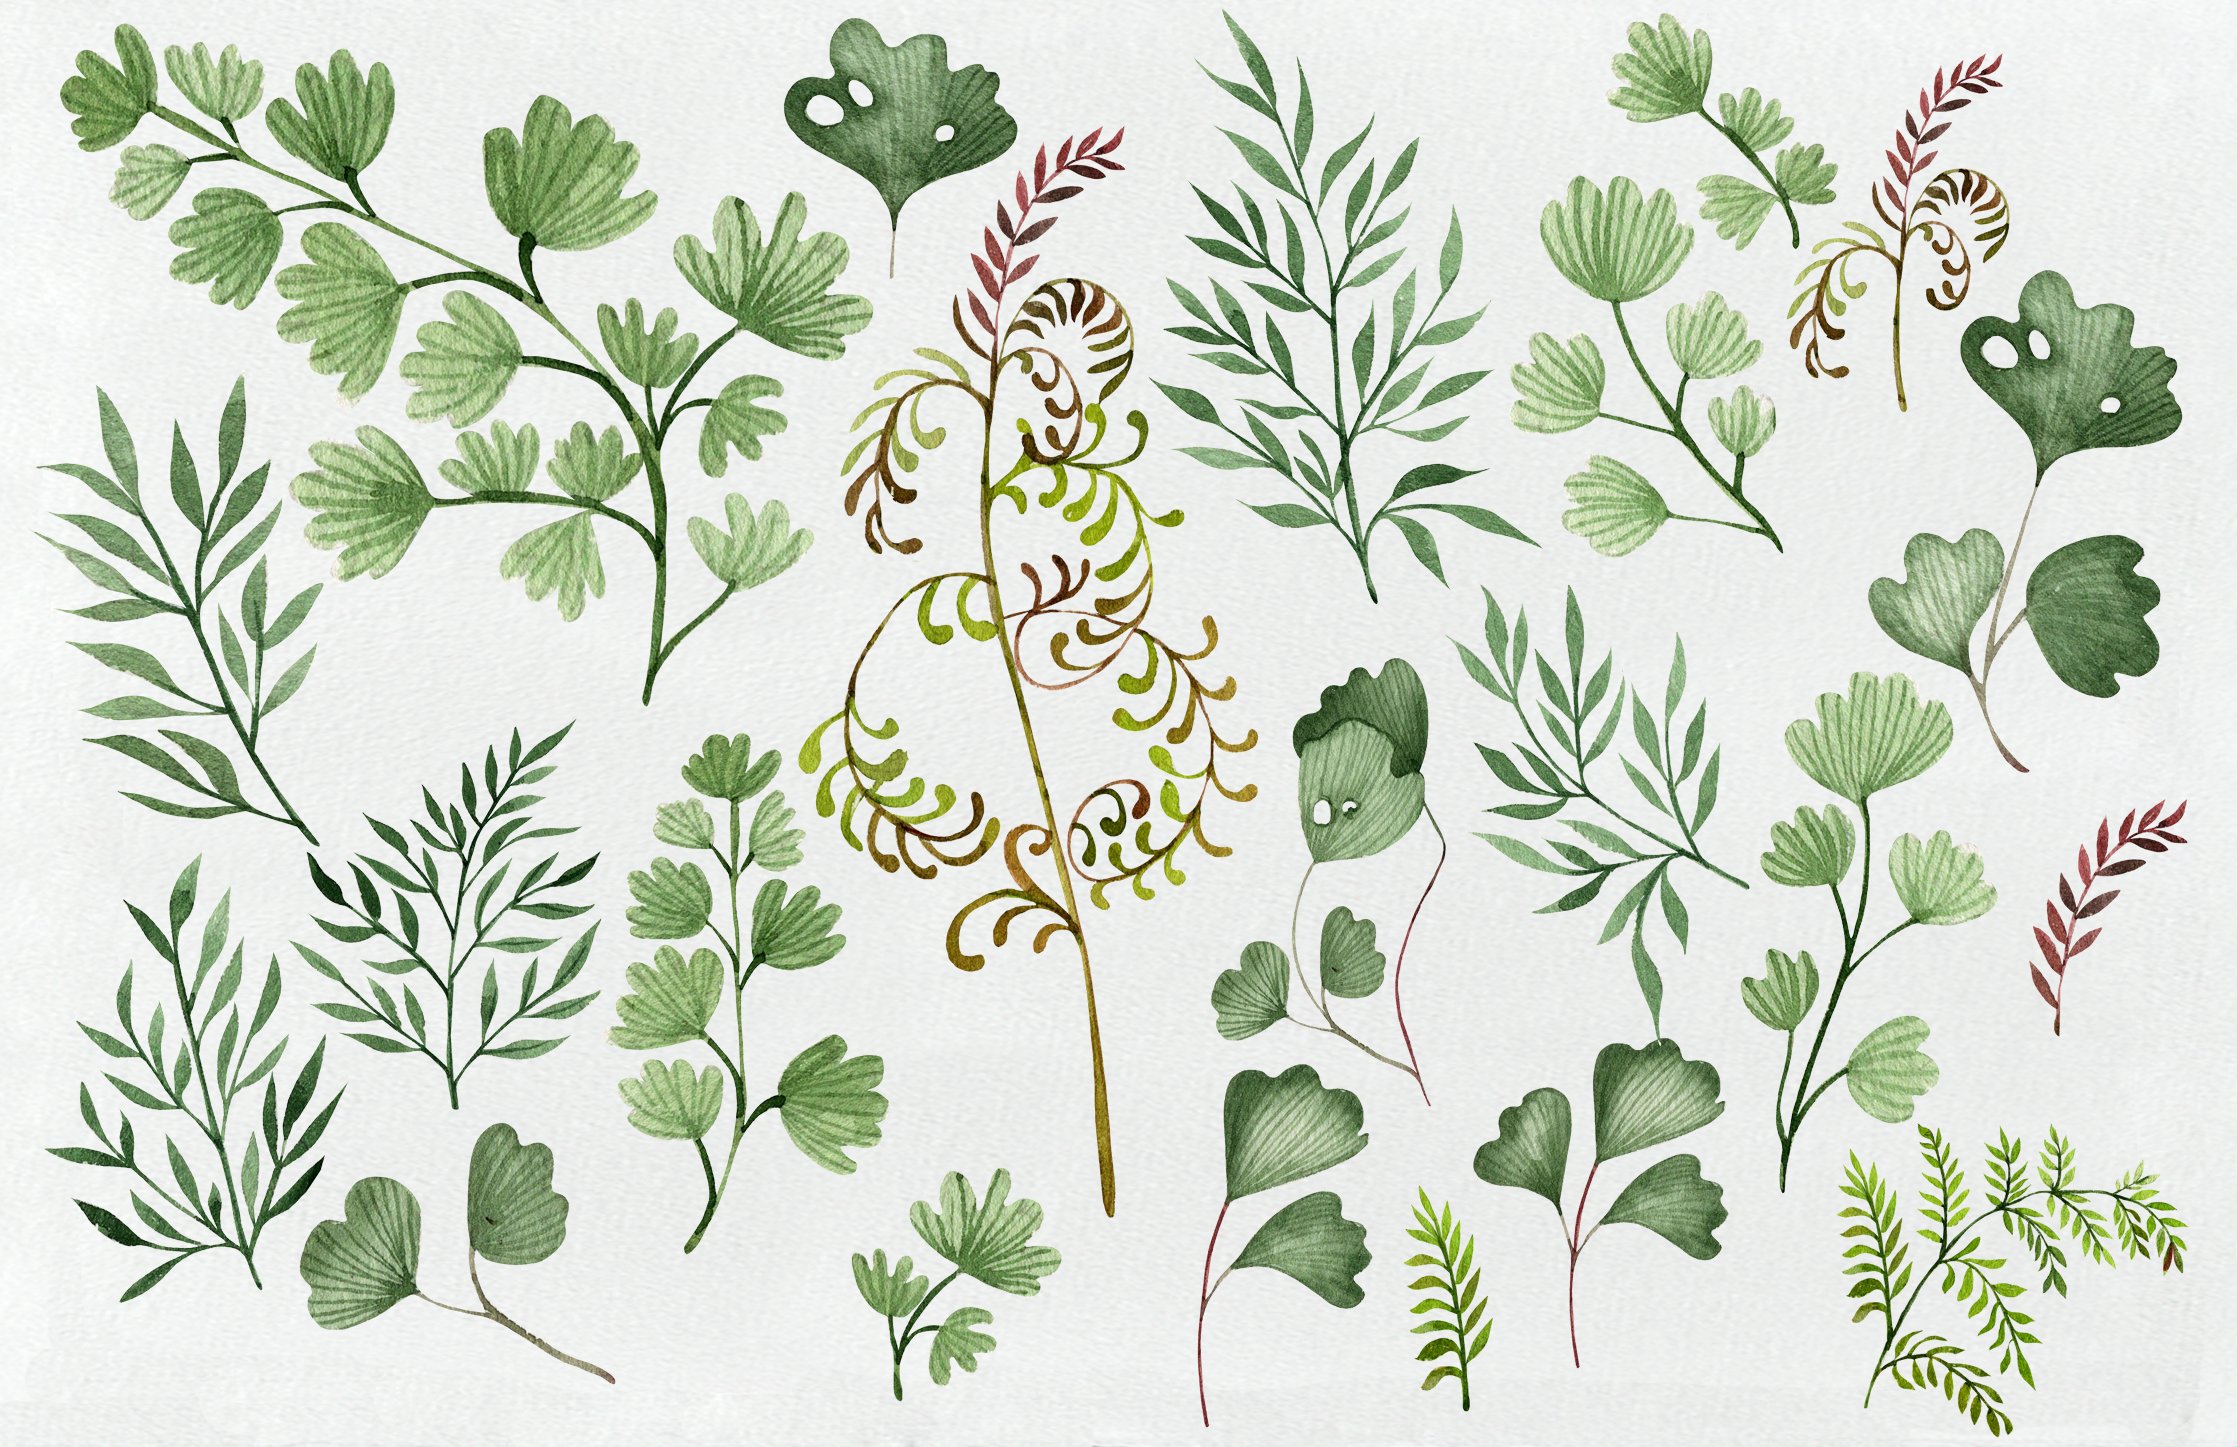 Drawing of a variety of leaves and plants.